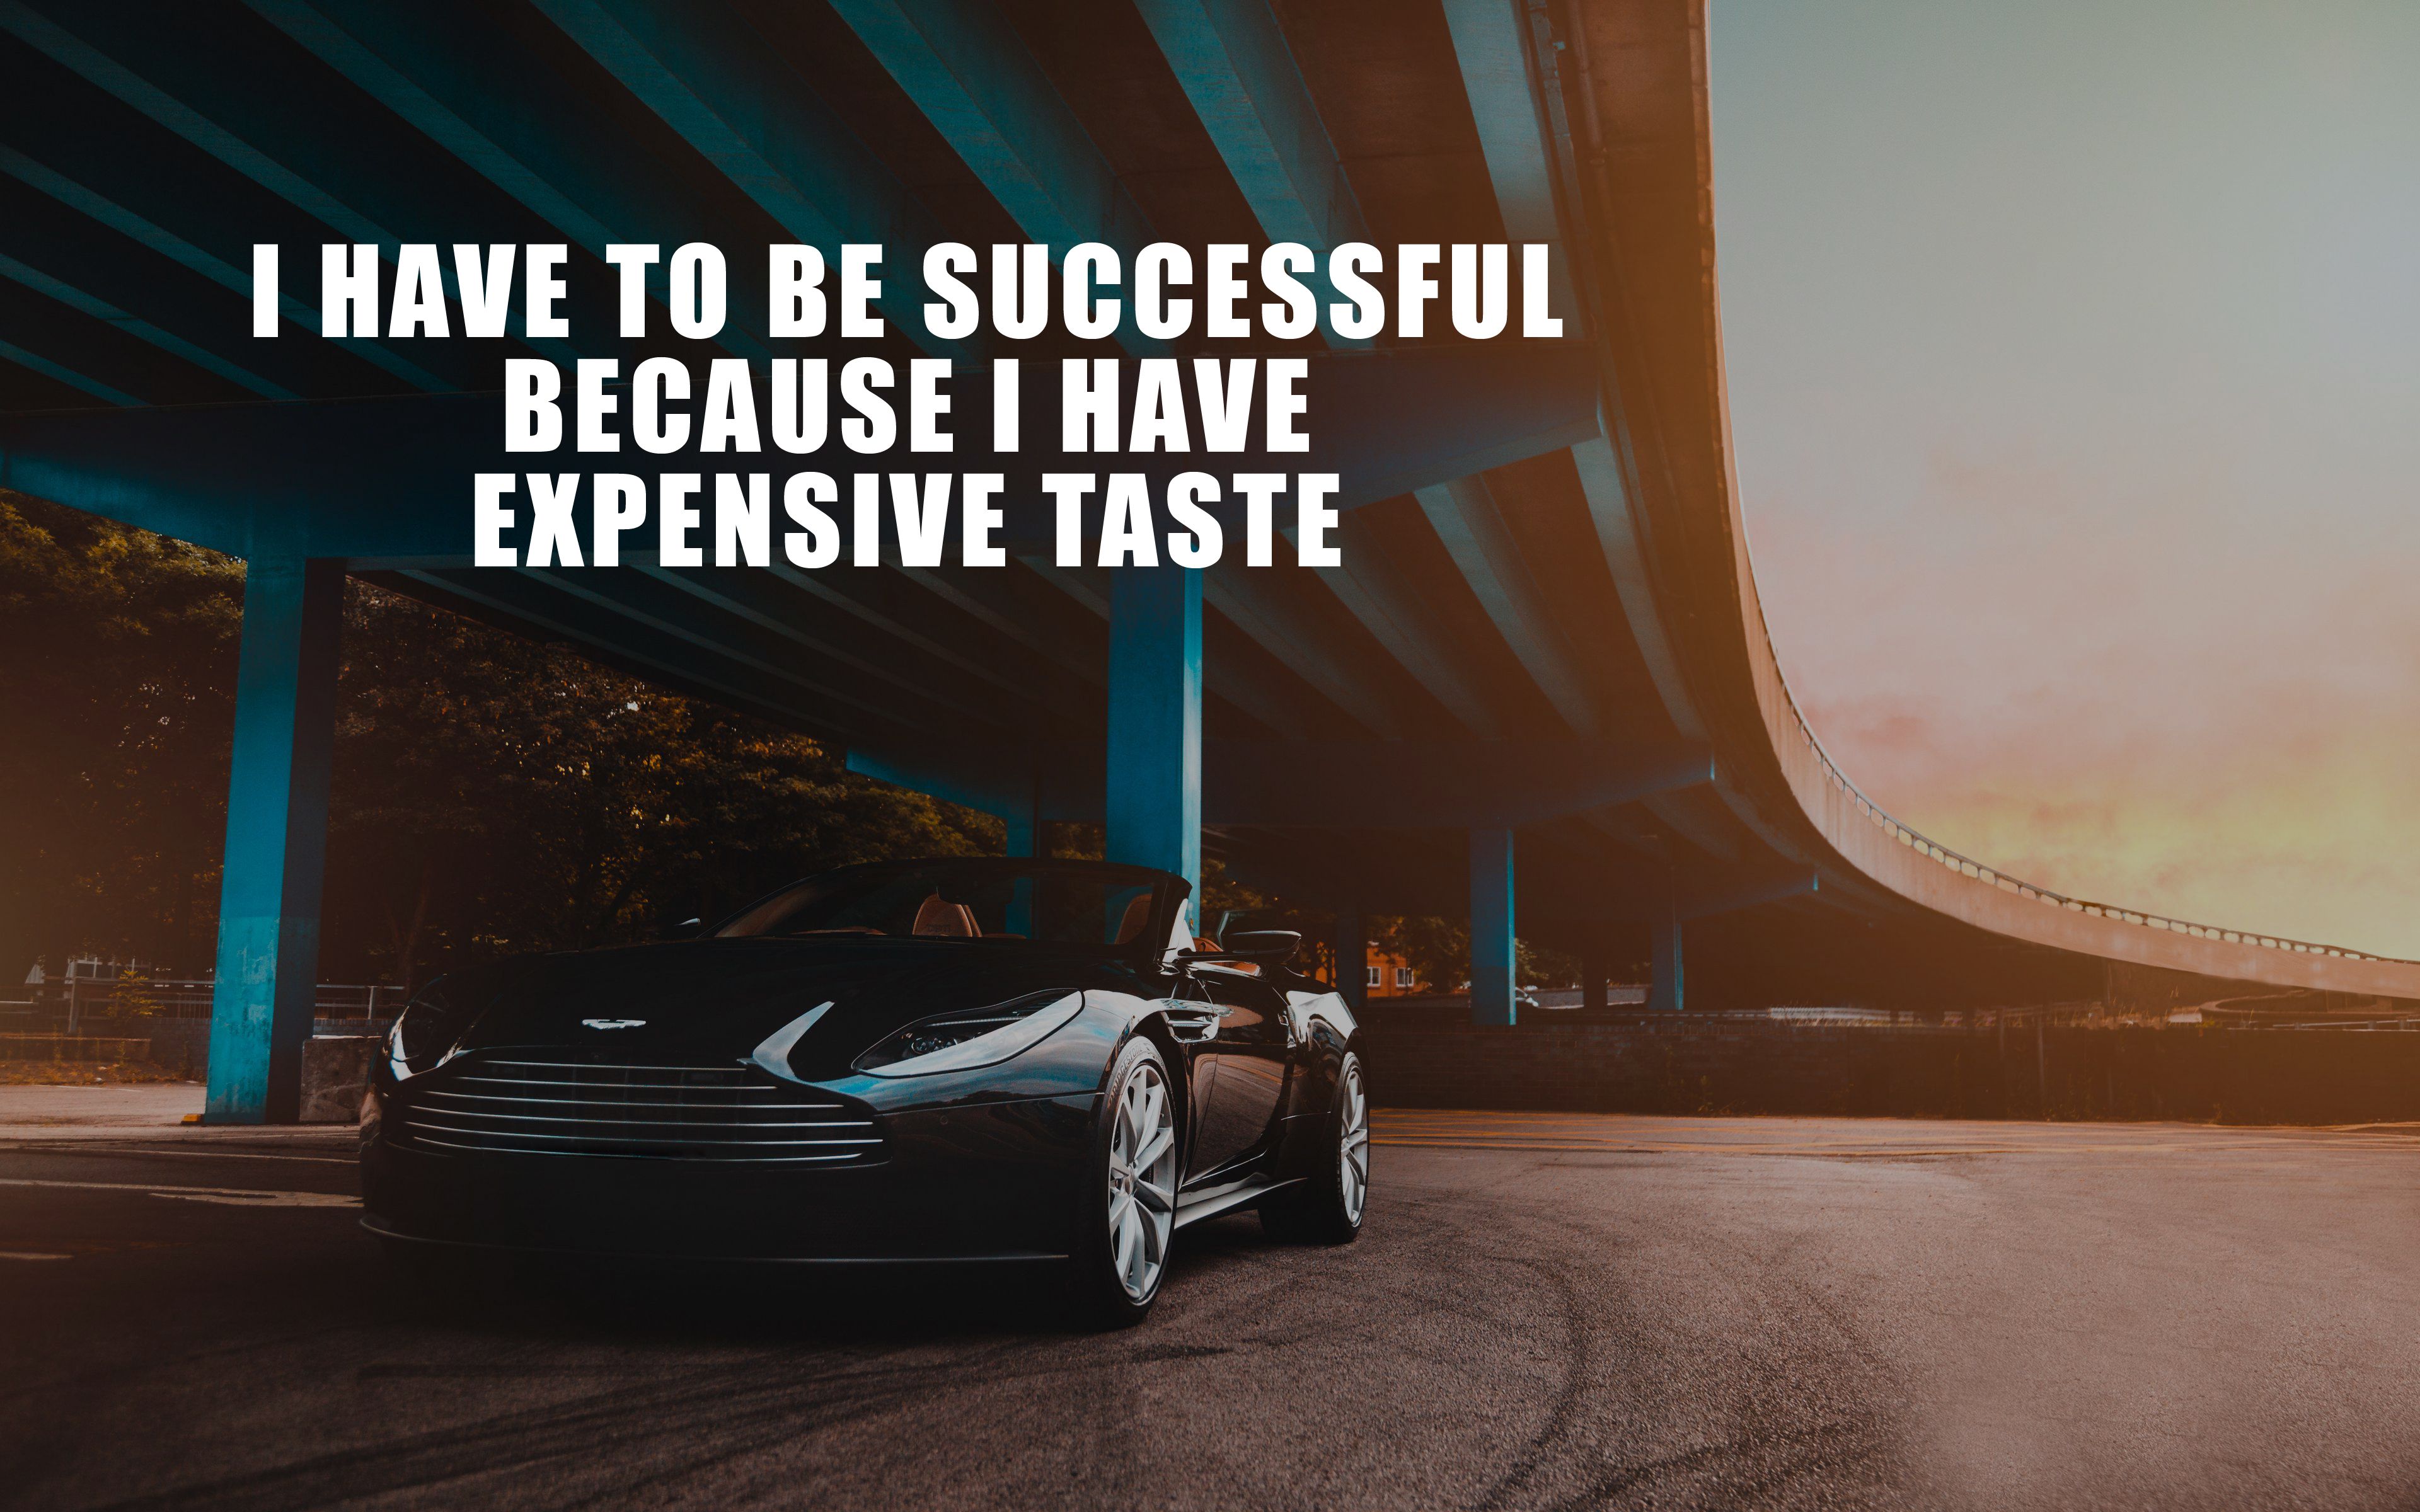 Super Thought on Expensive Luxury. HD .hdnicewallpaper.com